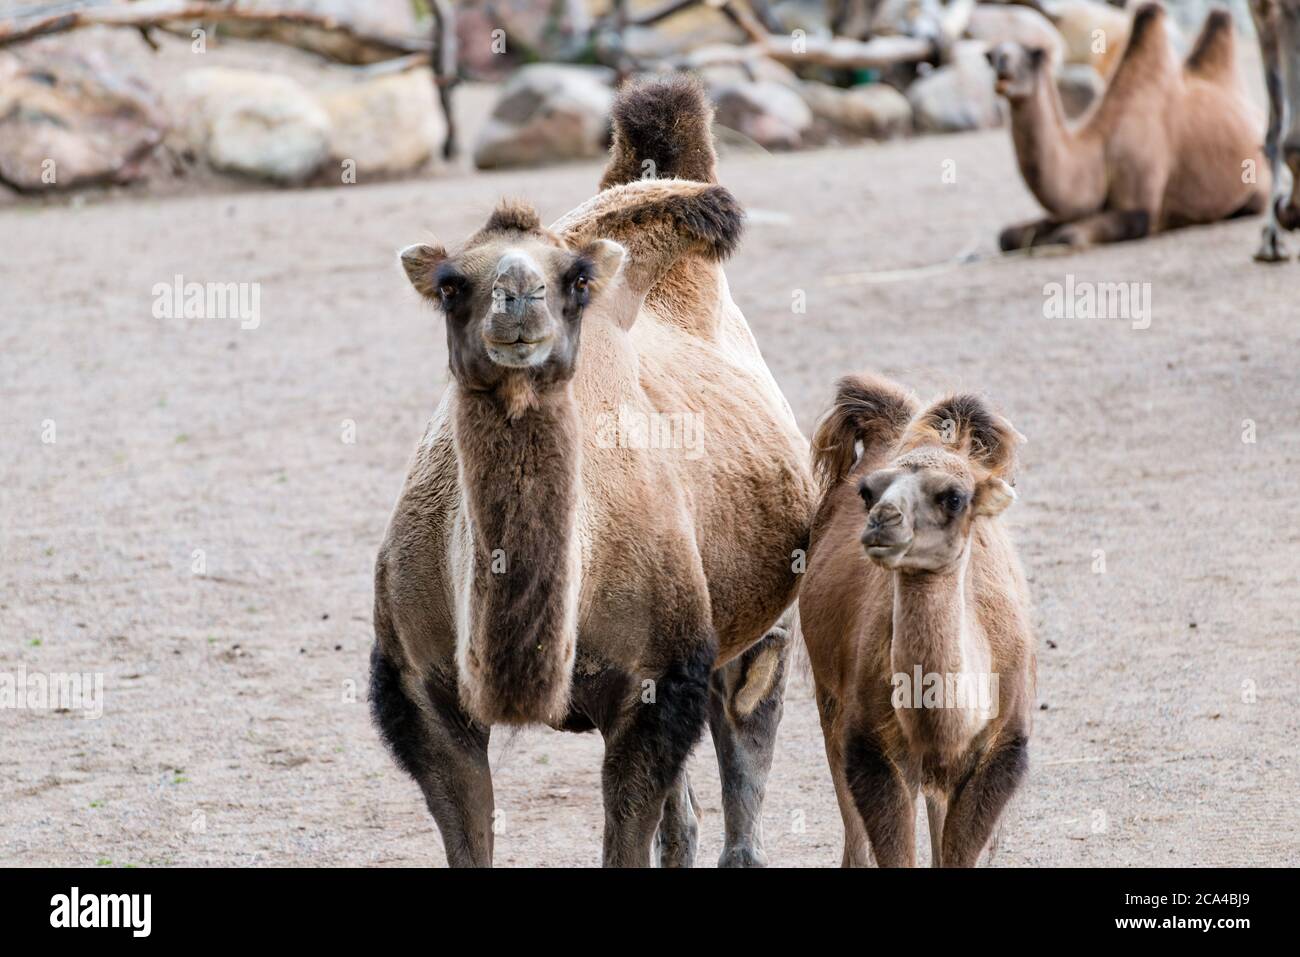 A camel is an even-toed ungulate in the genus Camelus that bears distinctive fatty deposits known as 'humps' on its back. Stock Photo